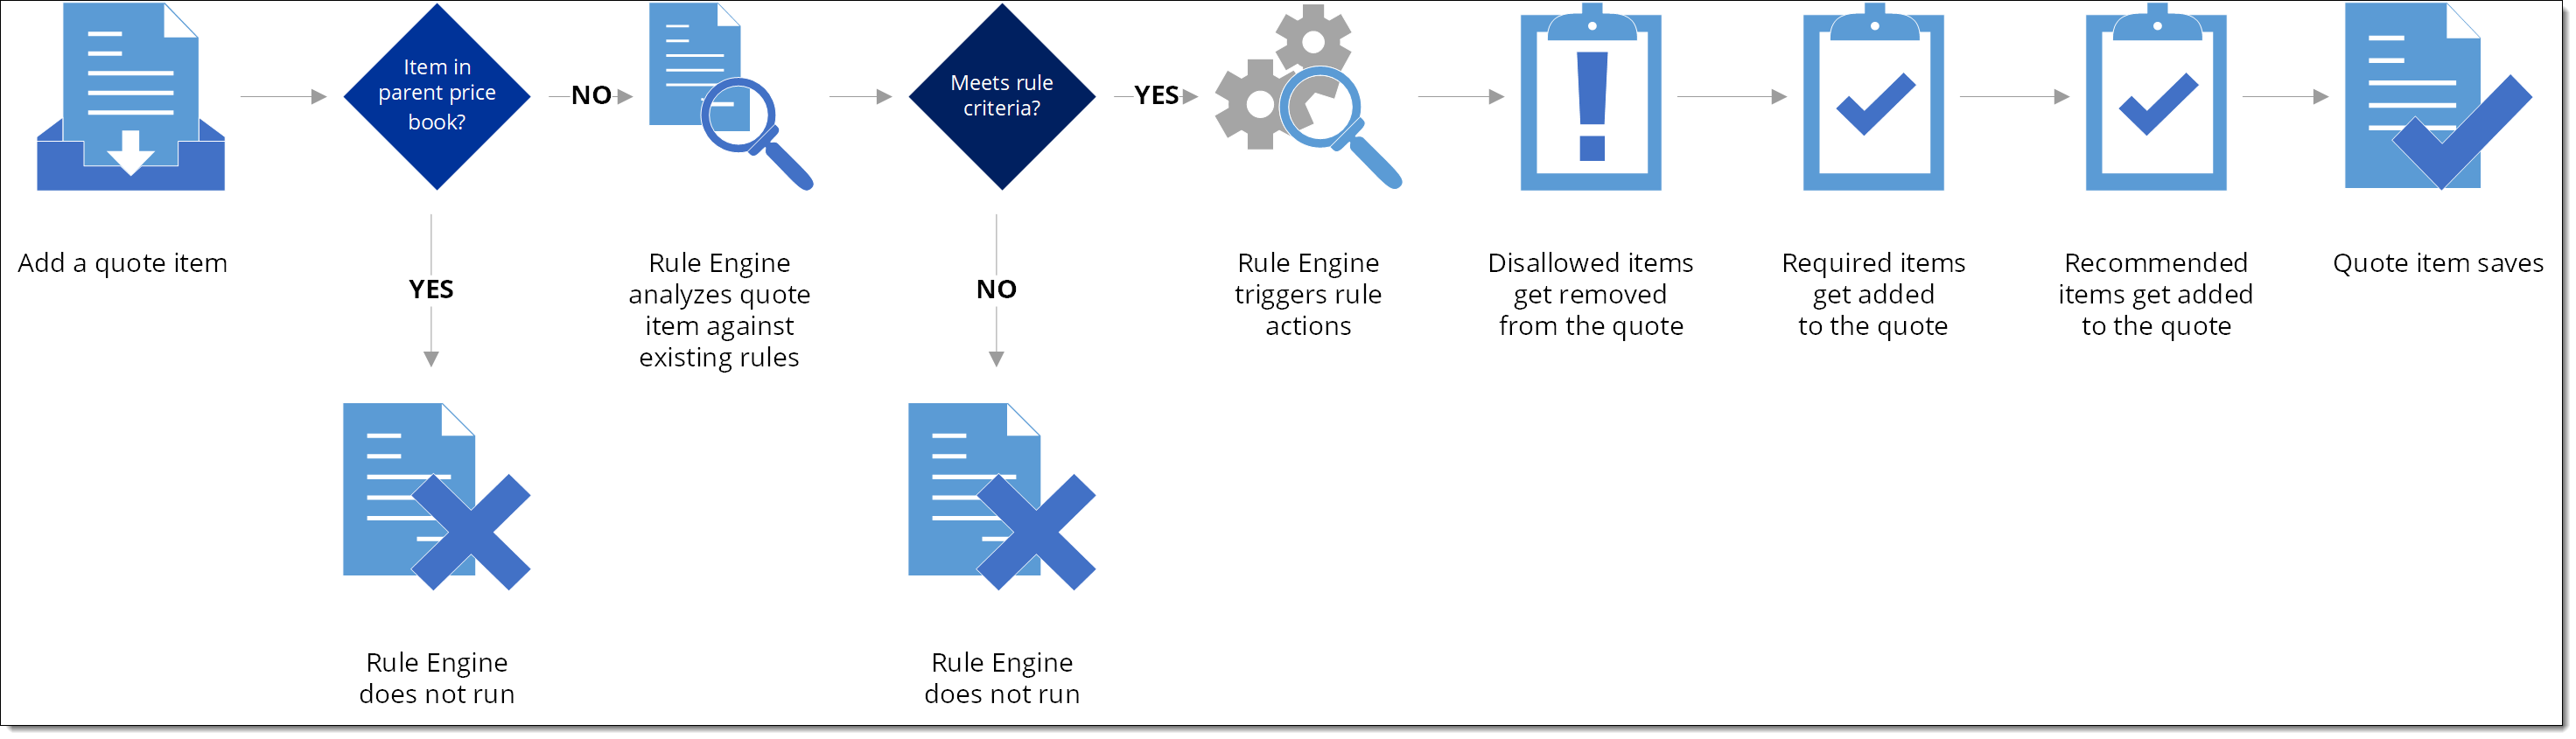 Graphic showing the rule engine process when adding a quote item in FieldFX Mobile